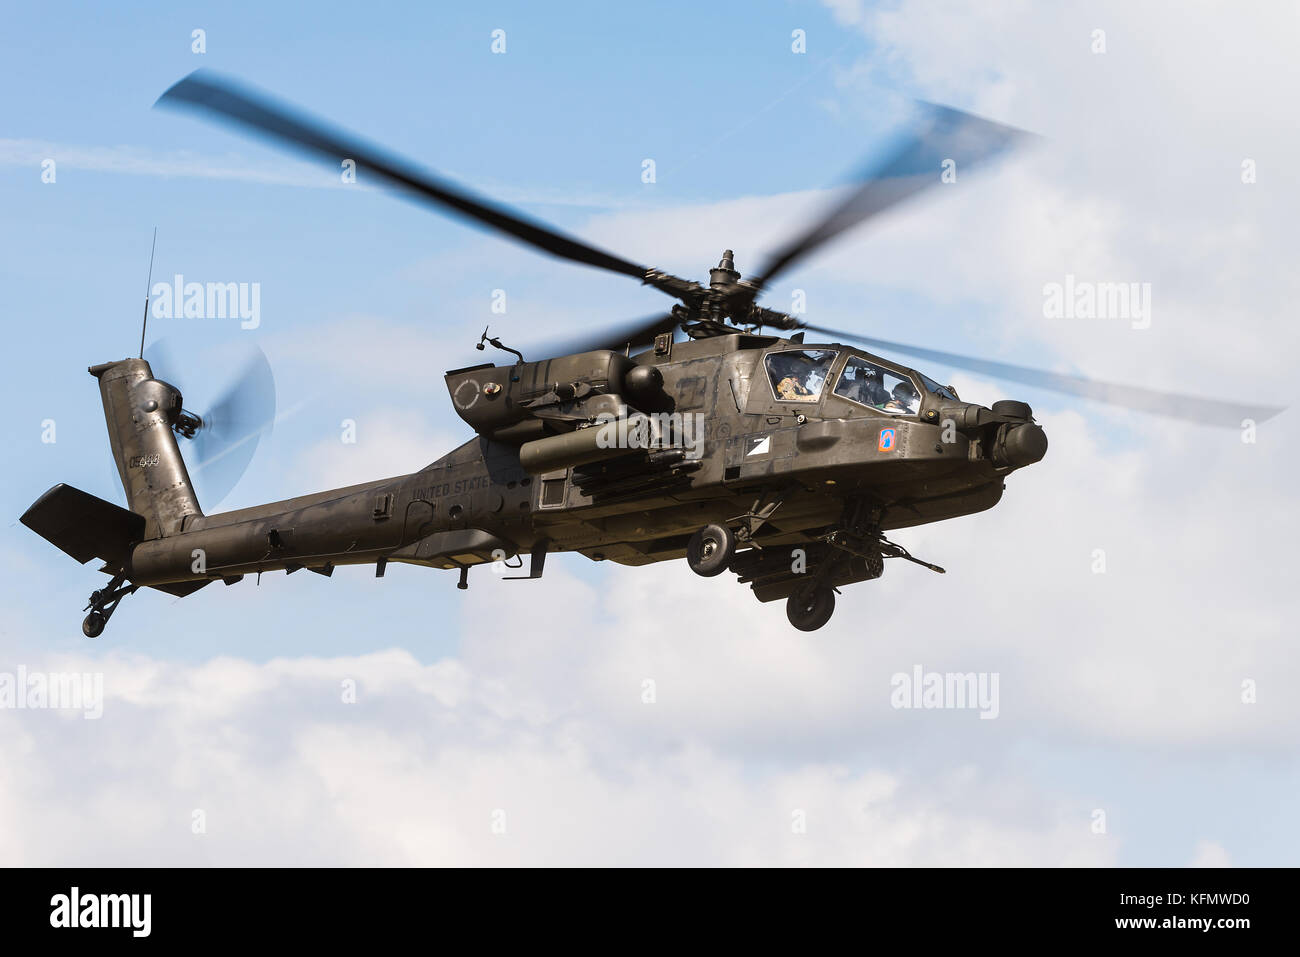 A Boeing AH-64 Apache attack helicopter of the 12th Combat Aviation Brigade of the US Army at the Beauvechain Air Base in Belgium, Europe. Stock Photo